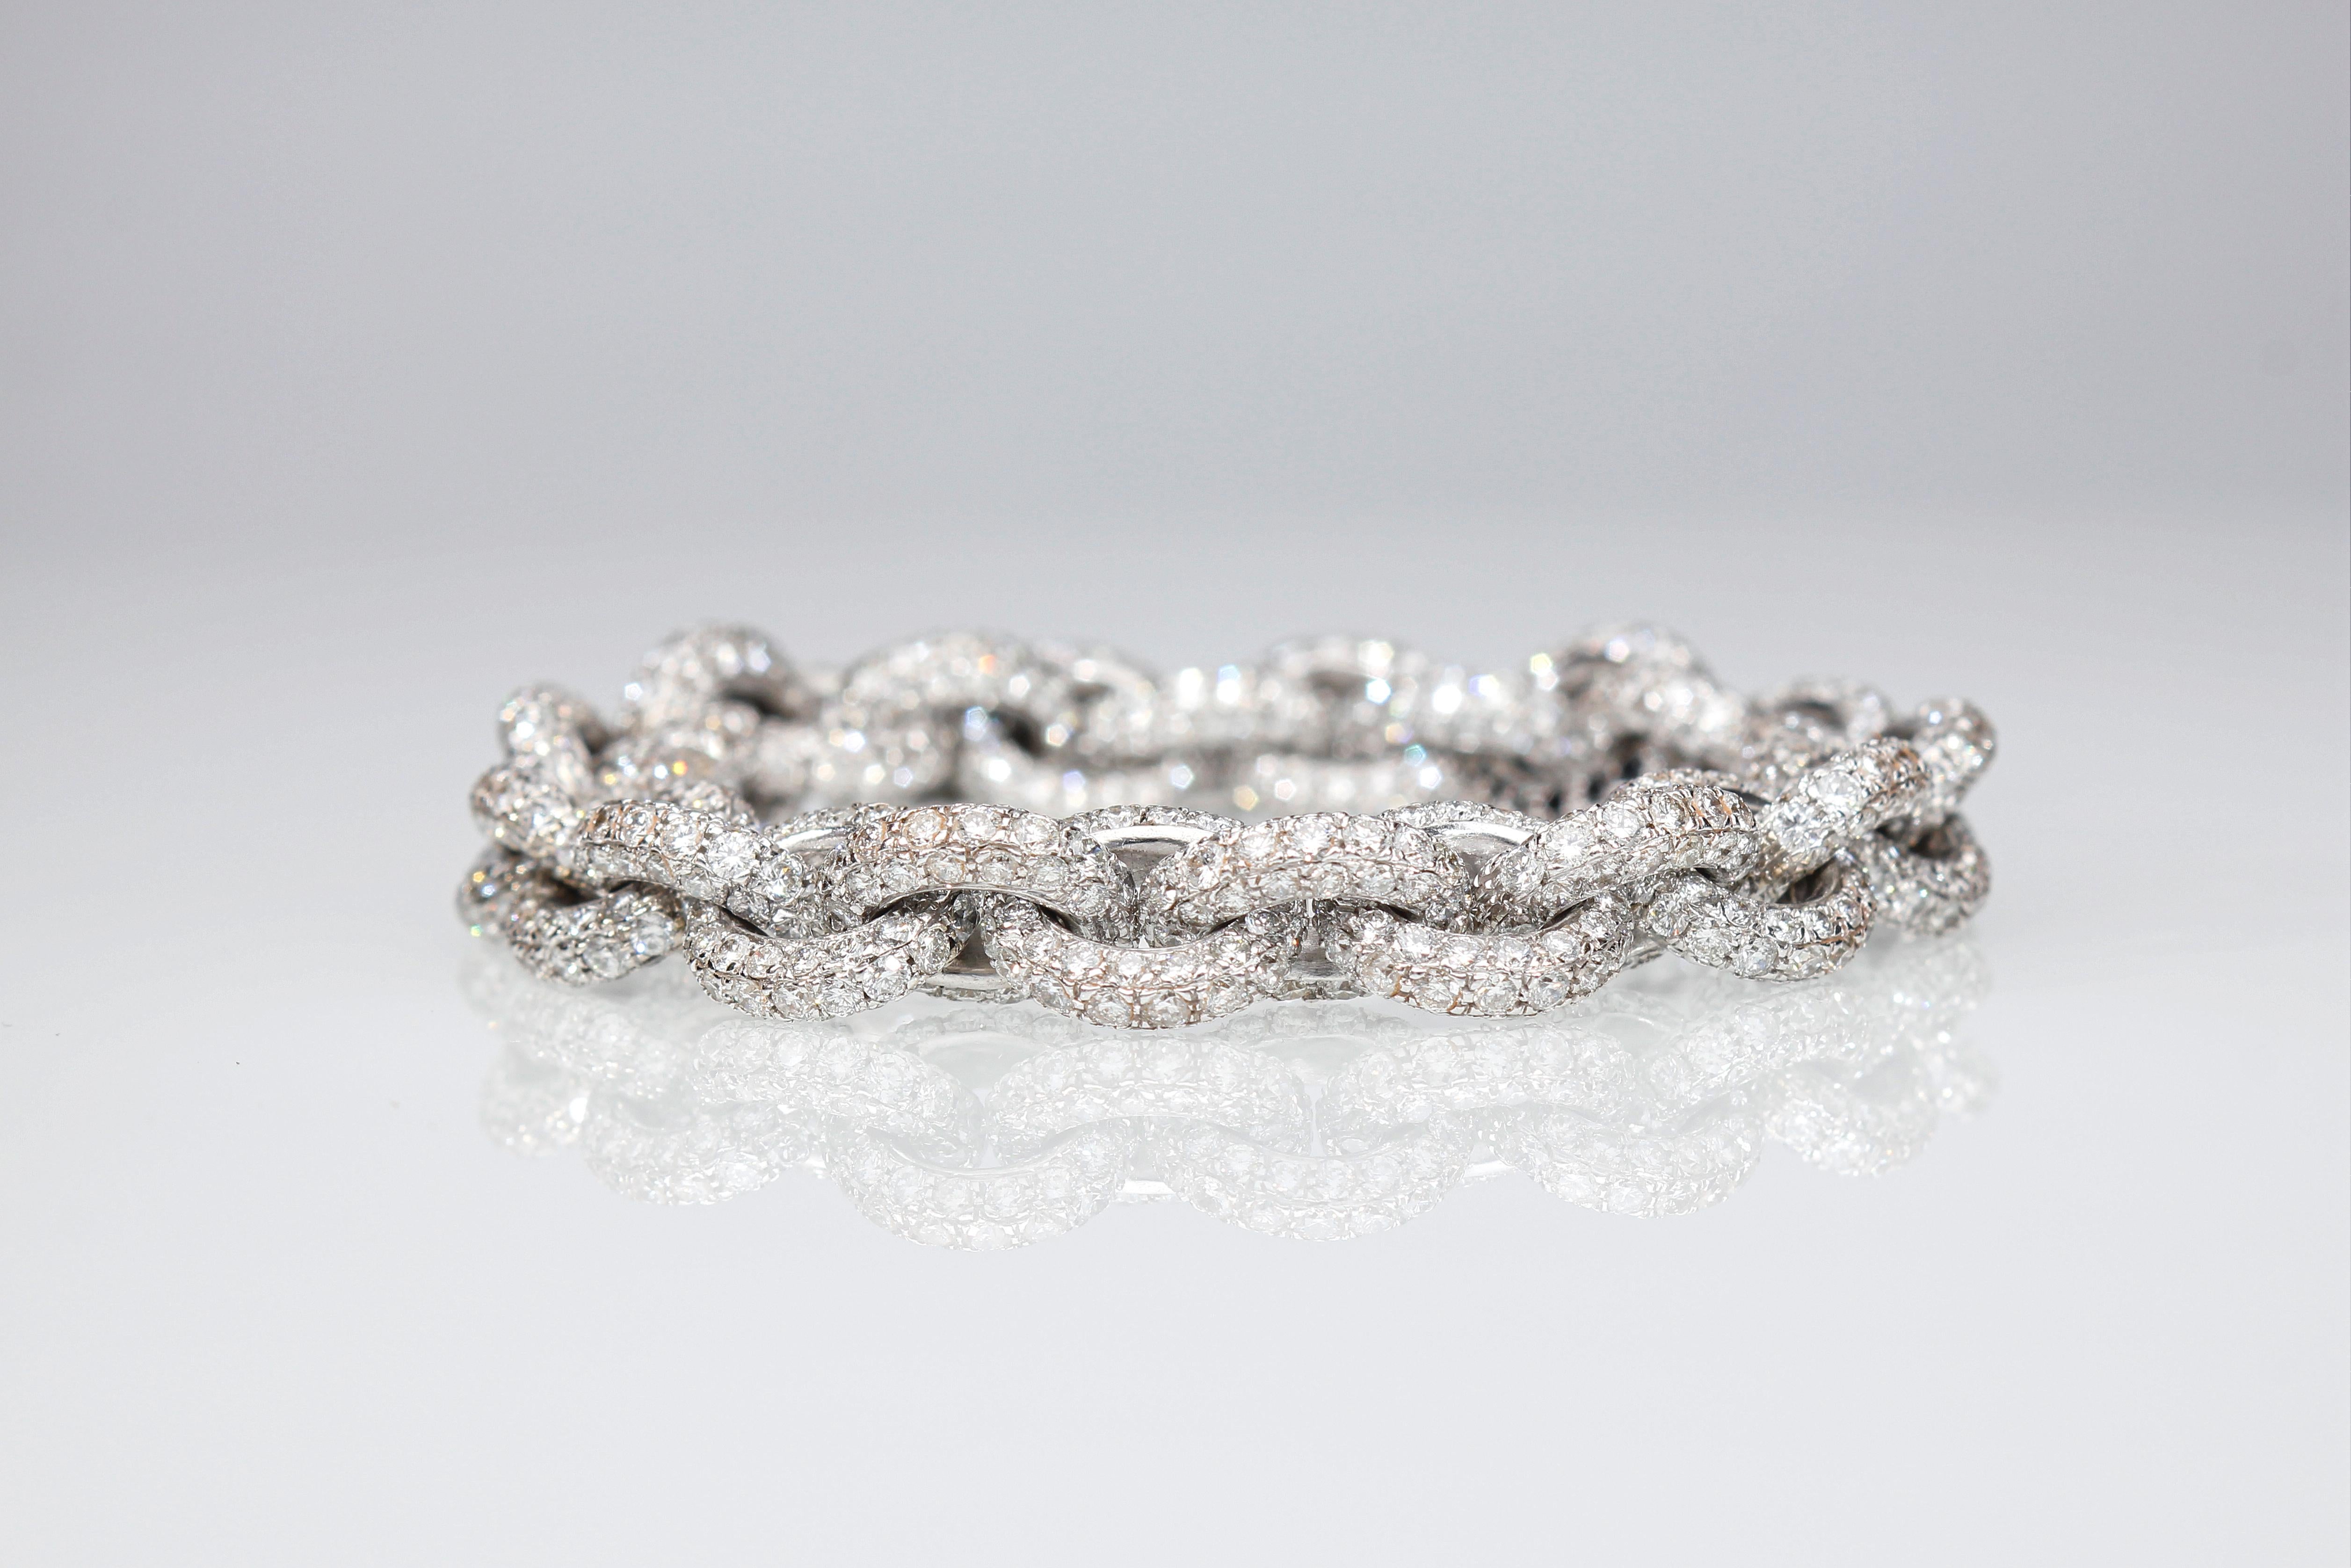 Brilliant Cut Chain Bracelet with 30.76 Ct of White Diamonds. Handmade. Made in Italy For Sale